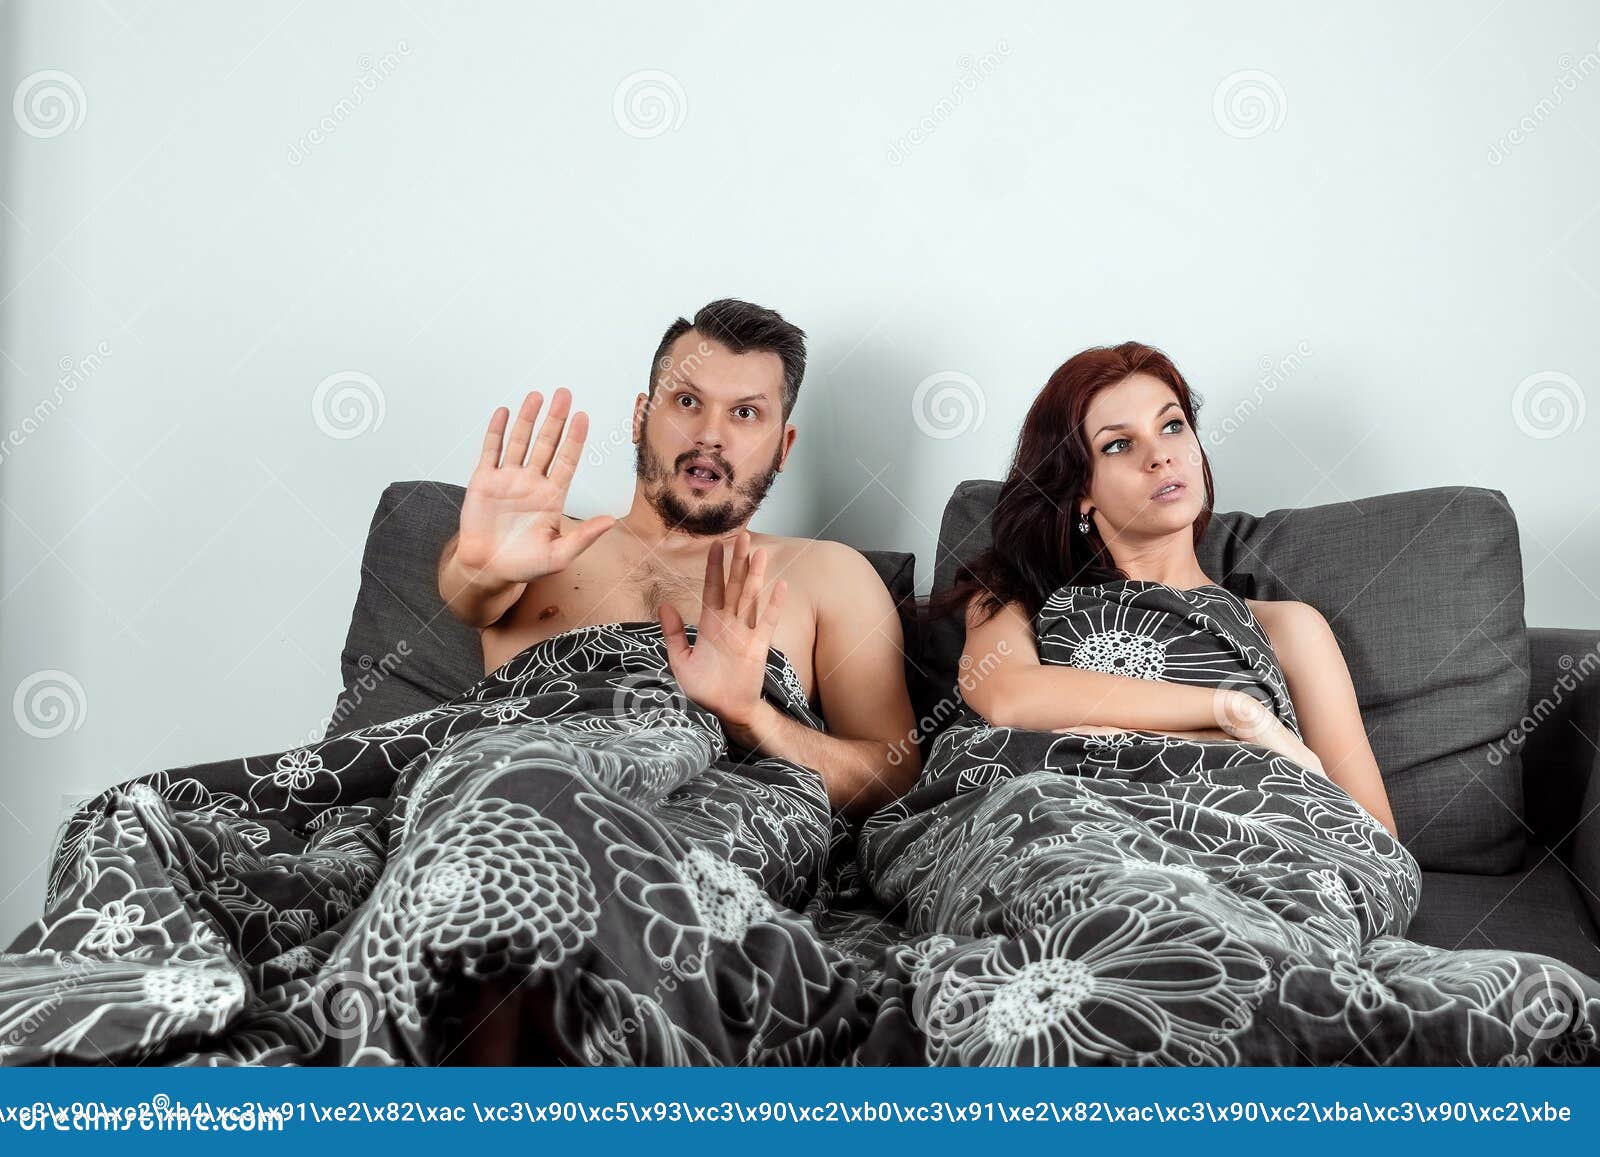 The Wife Catches Her Husband with His Mistress in Bed, Adultery image